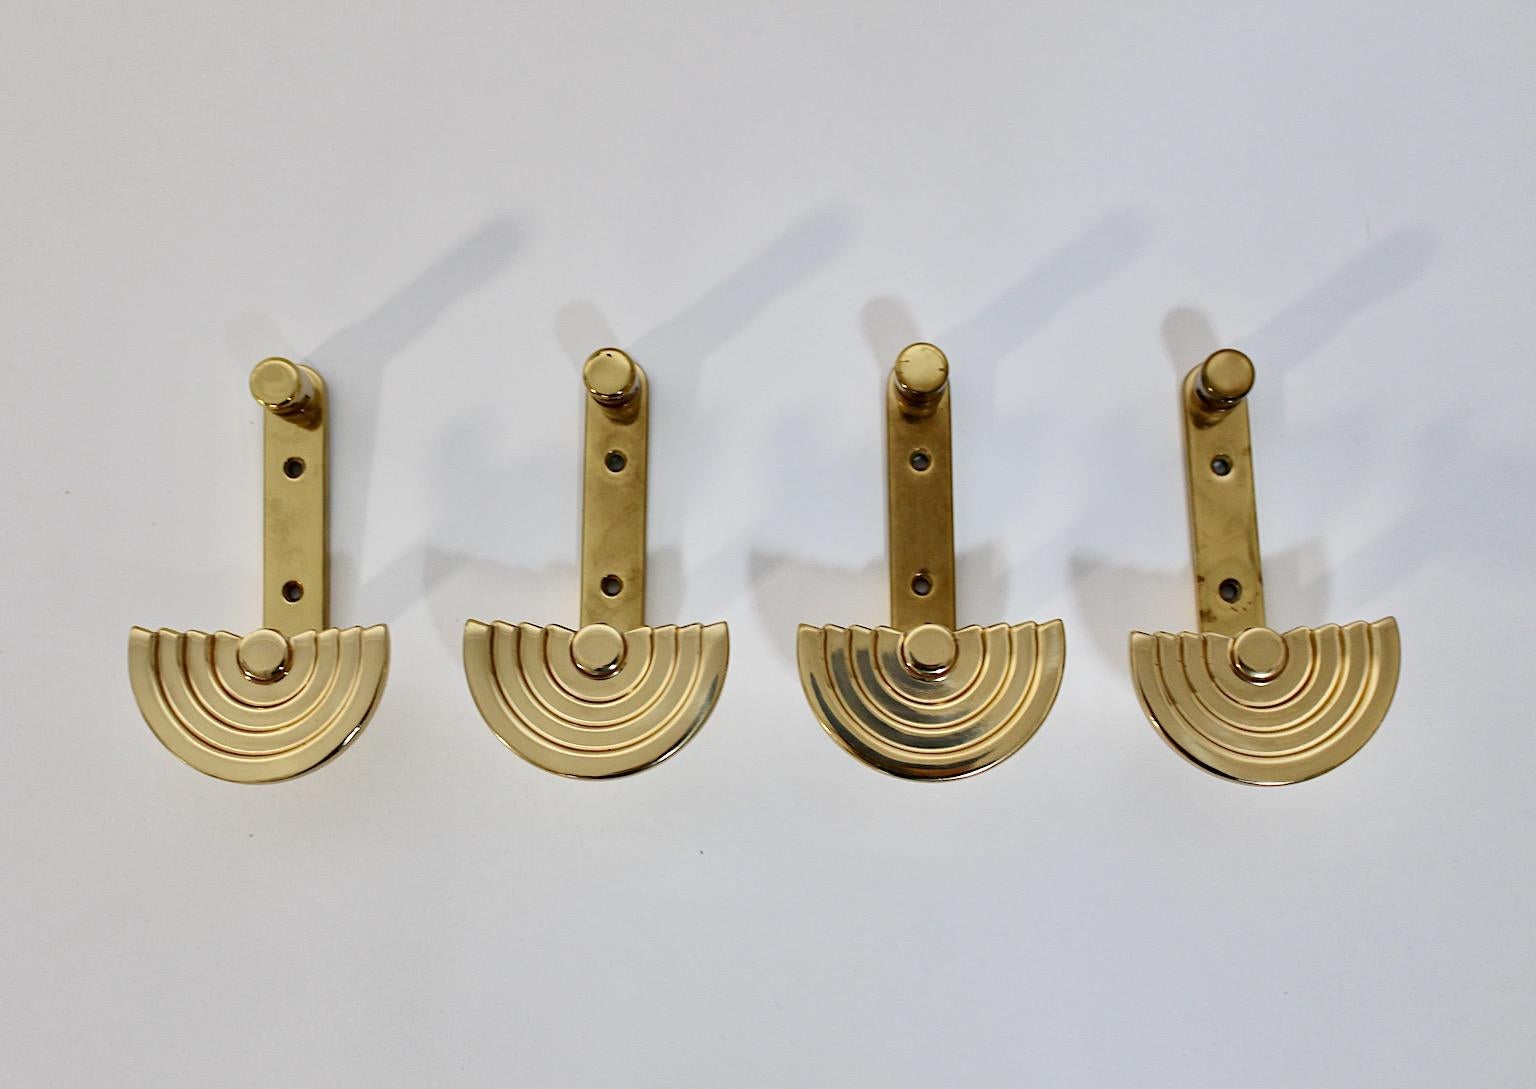 Ettore Sottsass Vintage Brass Four Wall Hooks or Coat Hooks circa 1985 Italy In Good Condition For Sale In Vienna, AT